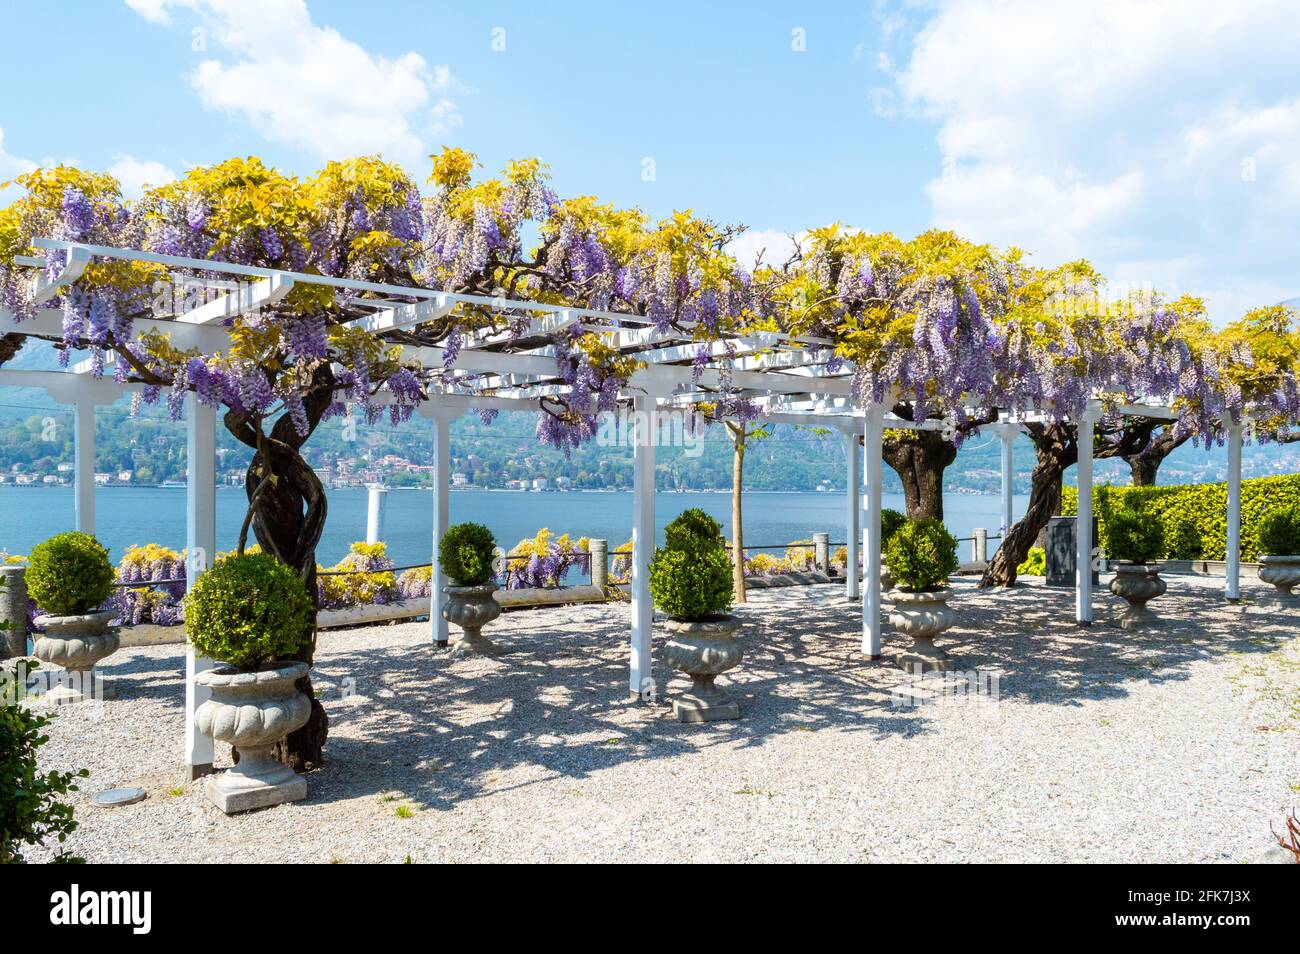 Nice canopy covered in wisteria flowers...beautiflu purple and yellow colors in front of Lake Como in the little town of Bellagio Northern Italy Stock Photo